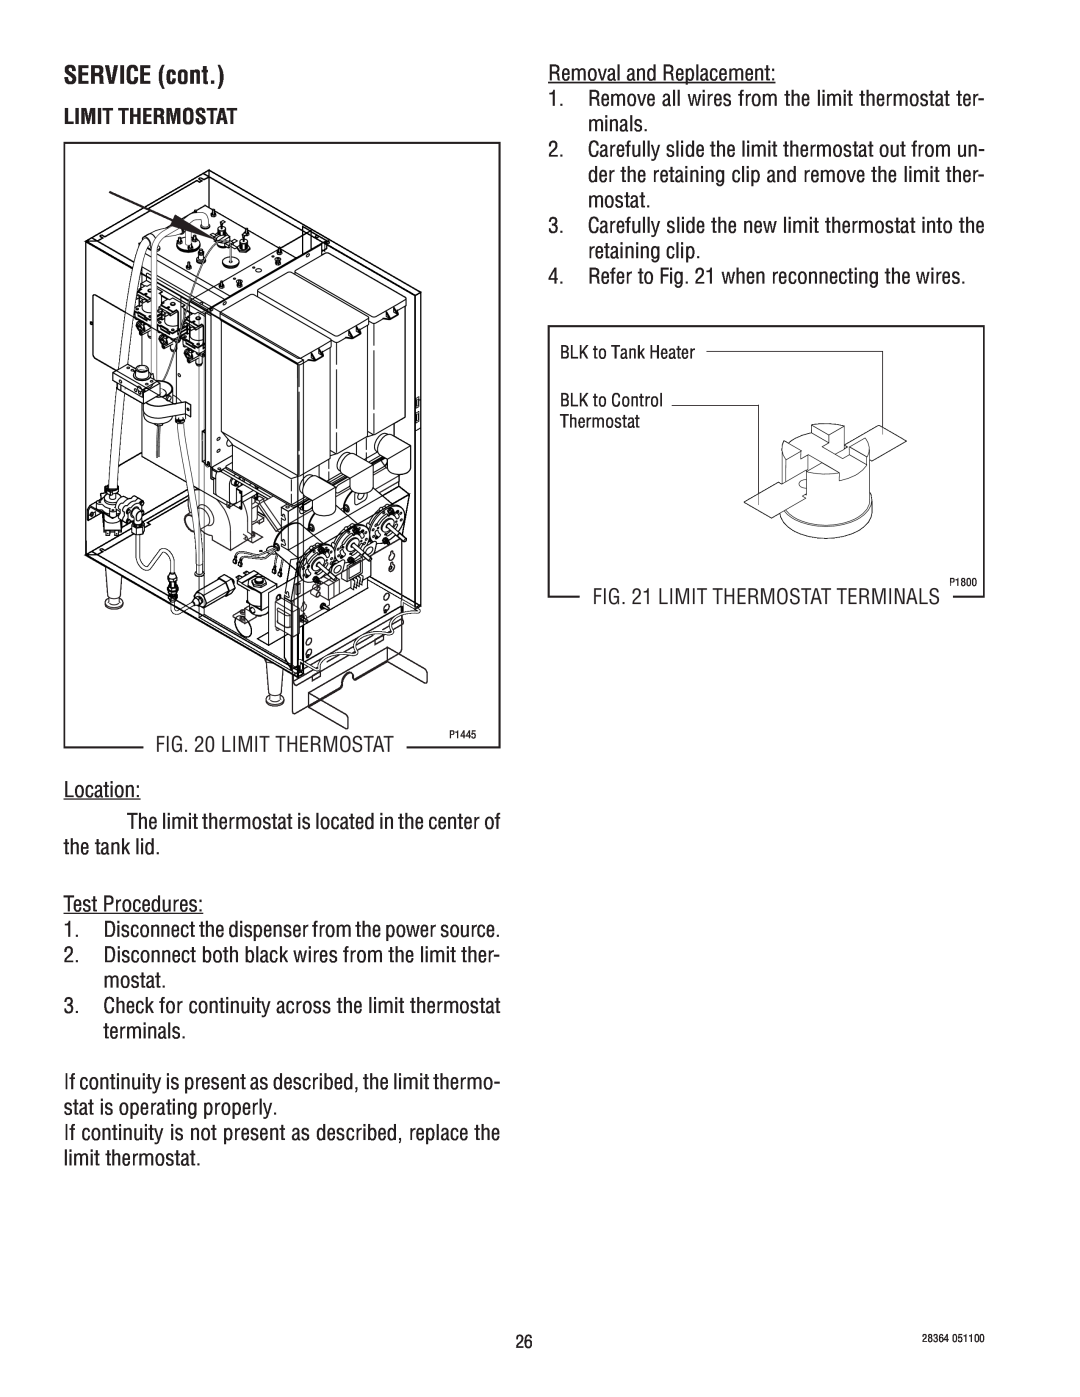 Bunn FMD-3 service manual Limit Thermostat, SERVICE cont 